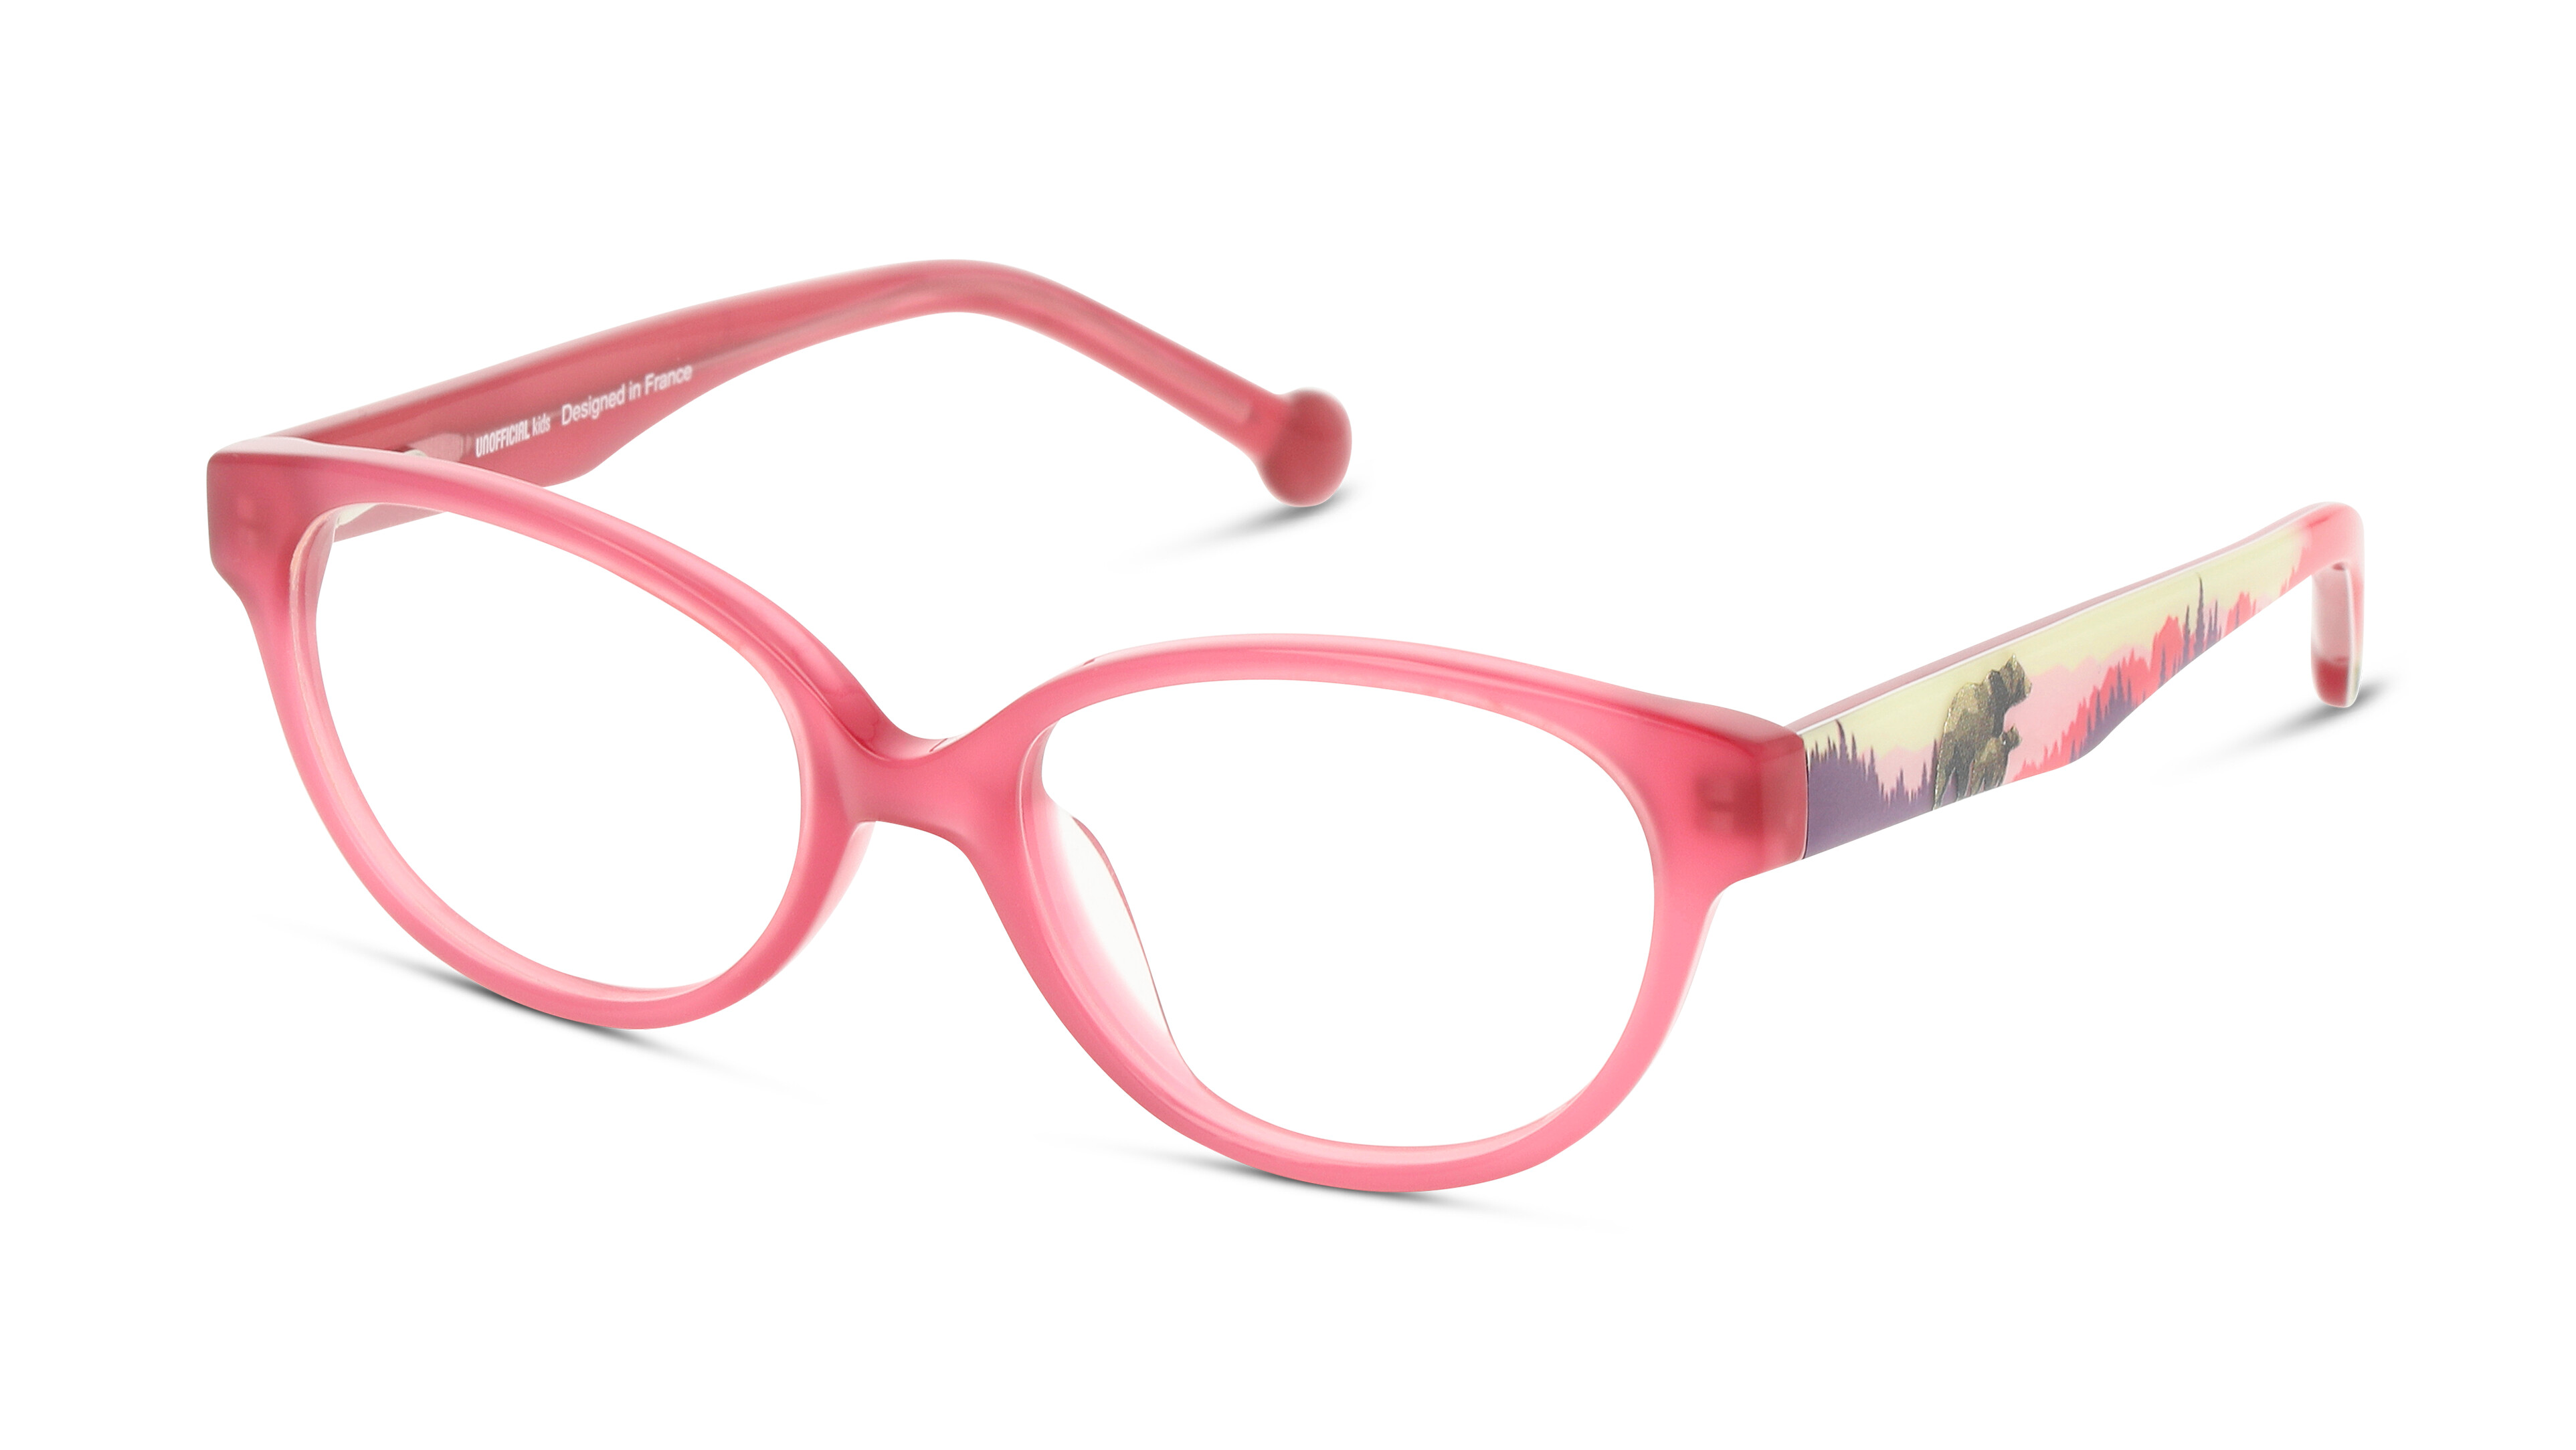 Angle_Left01 UNOFFICIAL UNOK0017 PX00 Brille Transparent, Rot